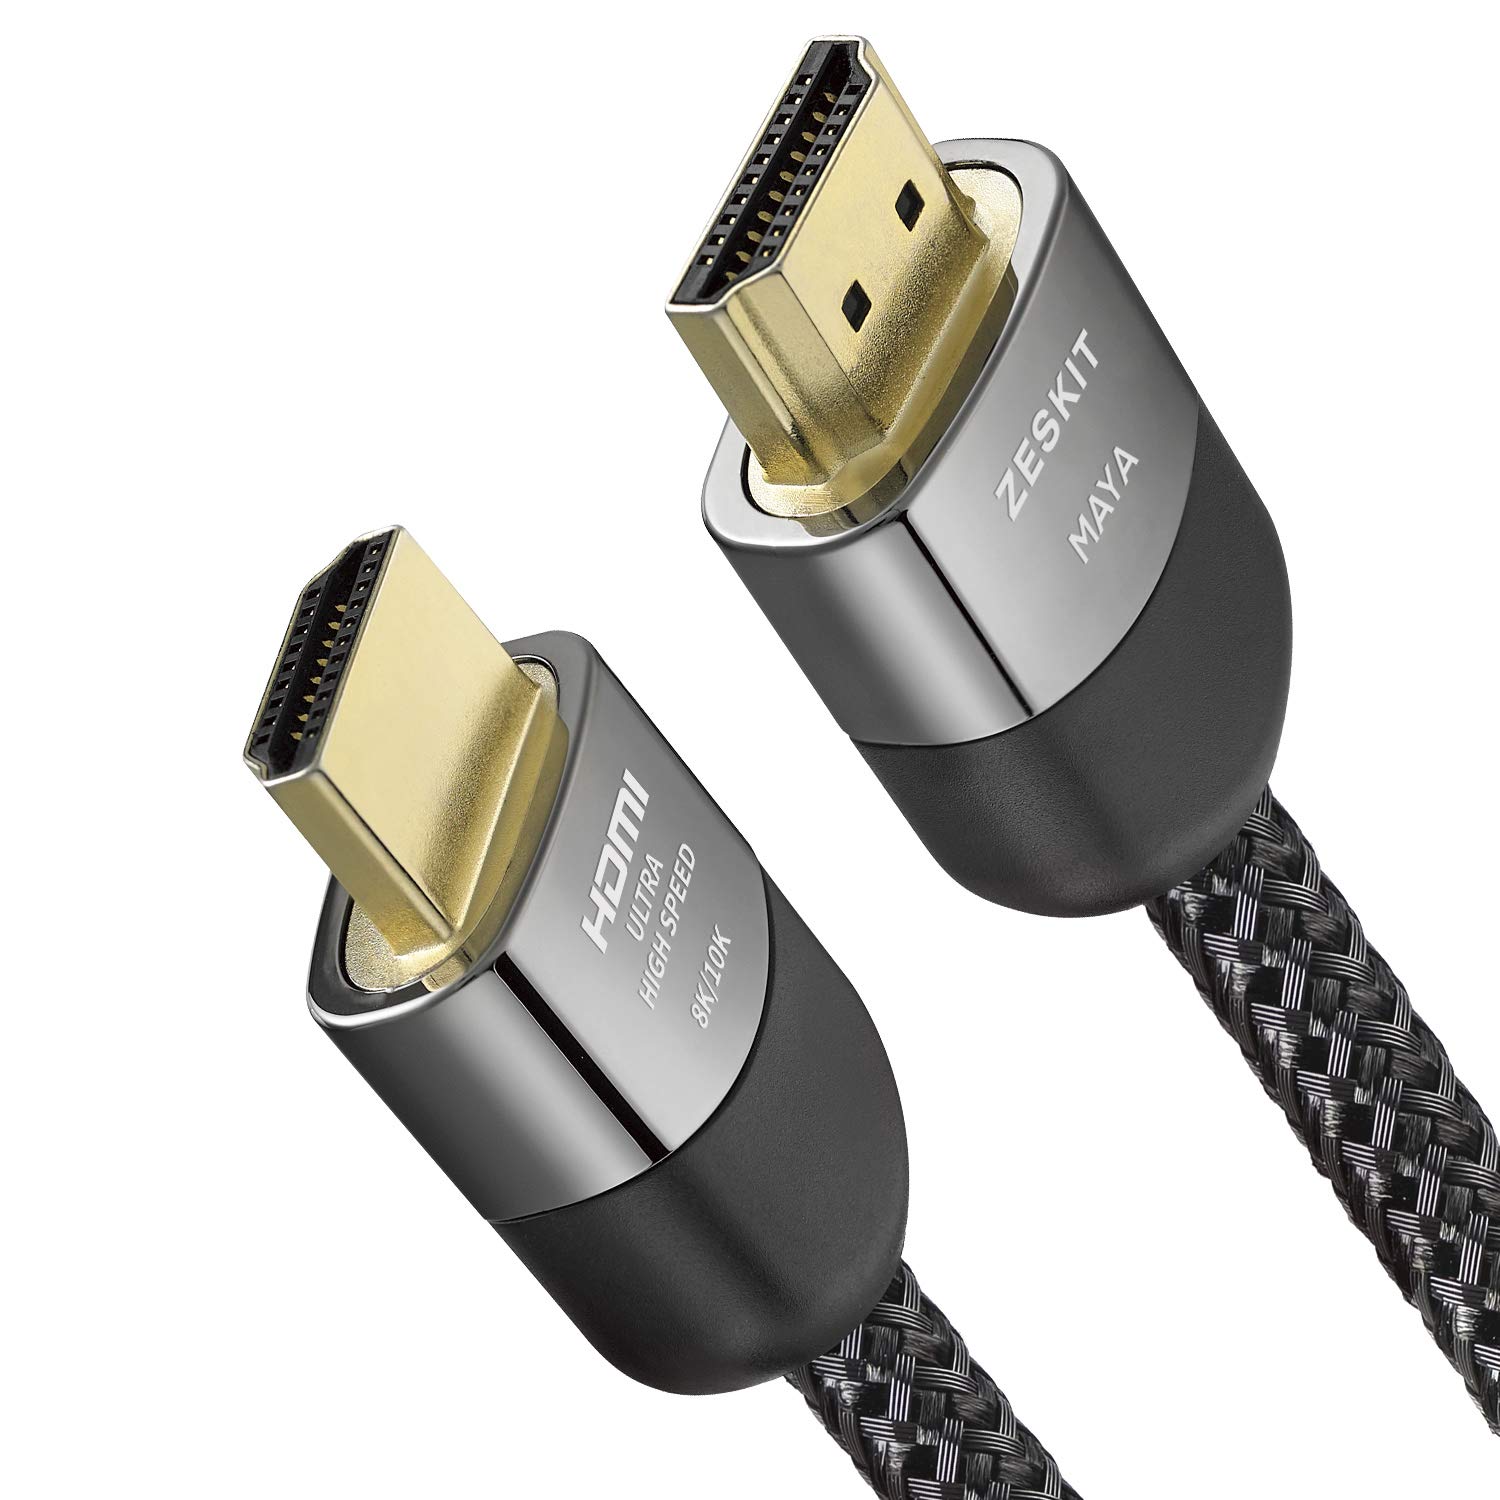 Zeskit Maya 8K HDMI Cable (Best HDMI Cable For PS5):